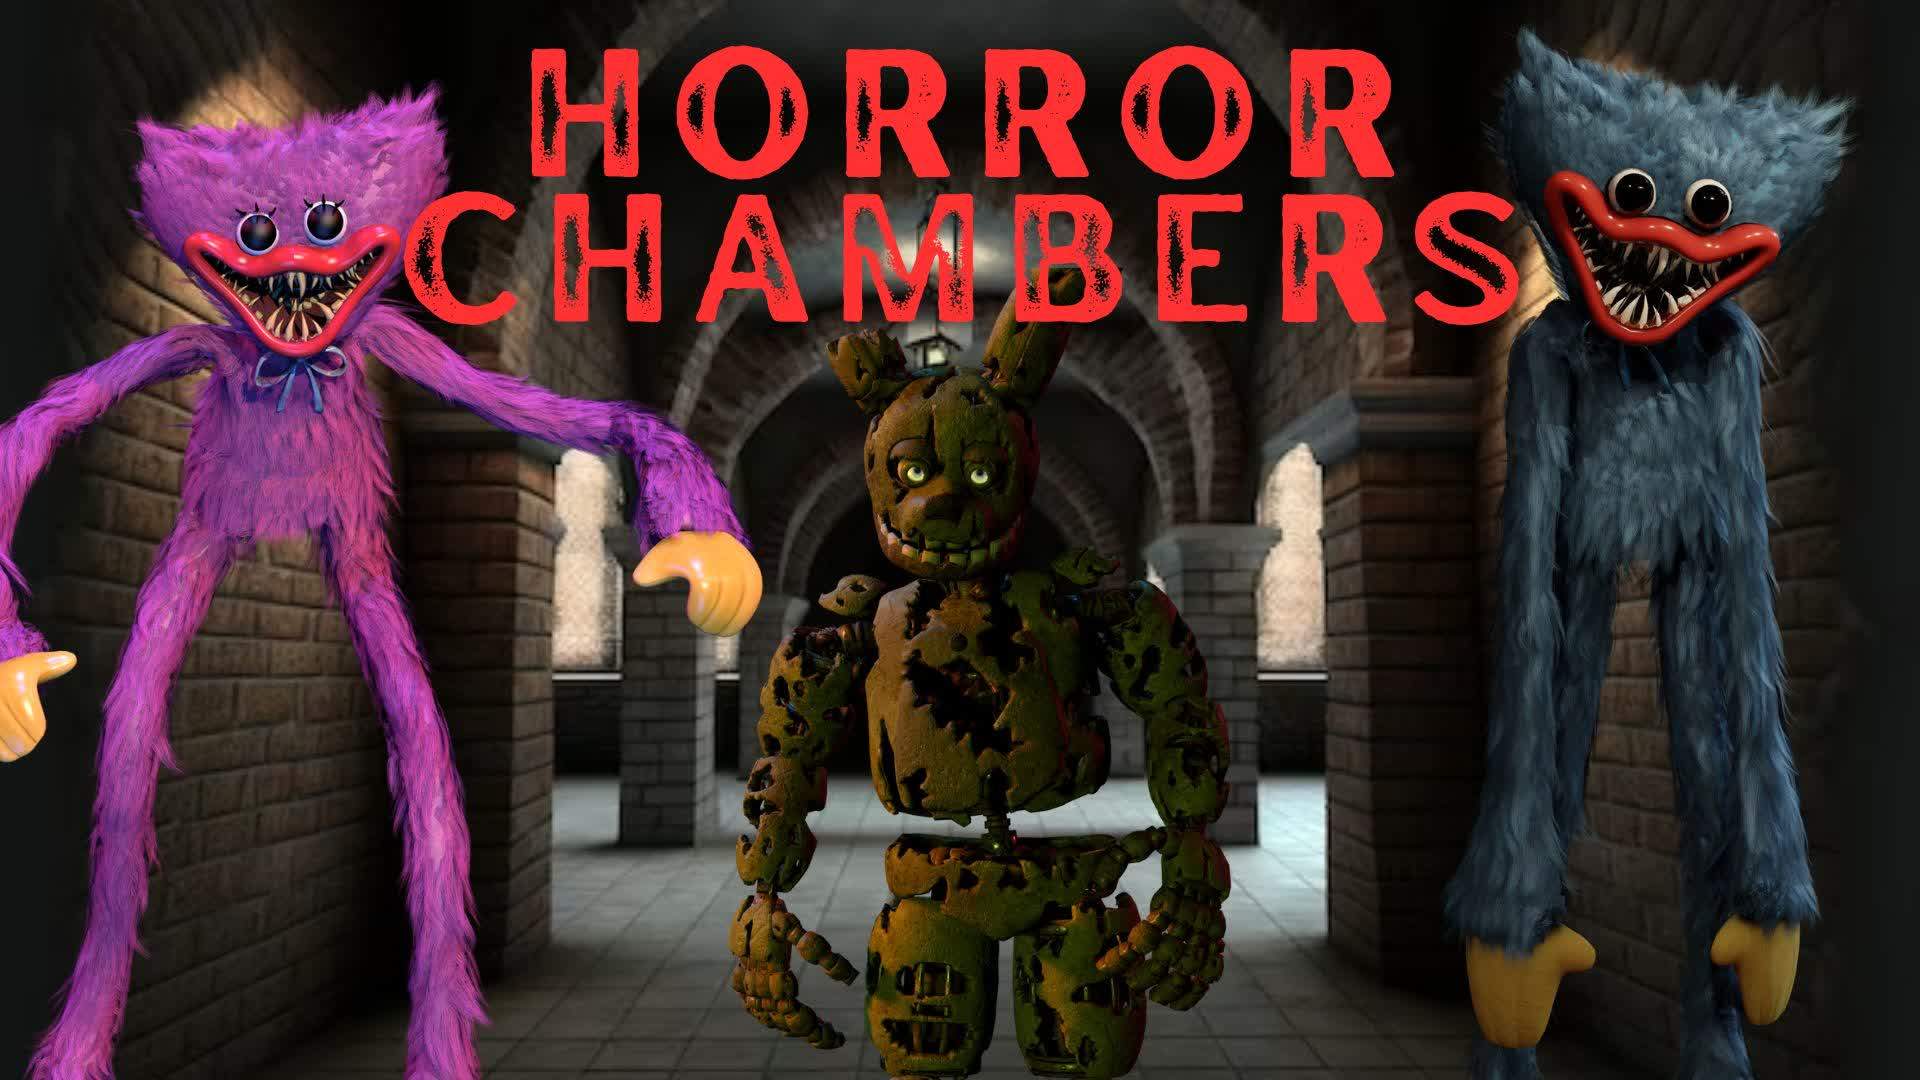 HORROR CHAMBERS CHAPTER 2 [ESCAPE]